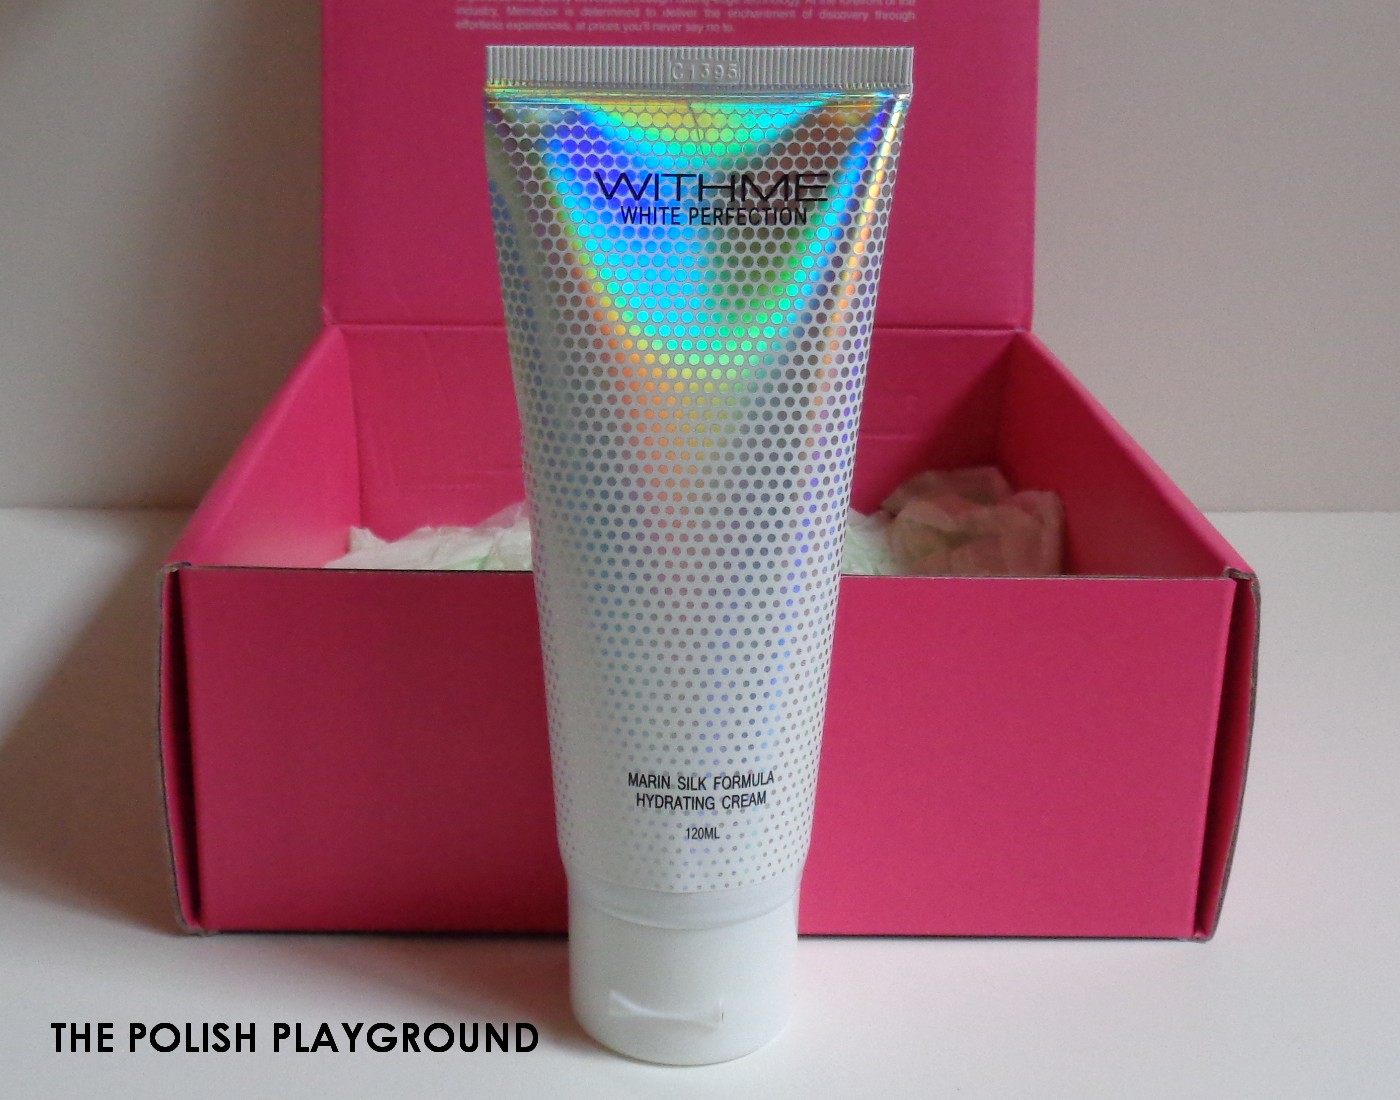 Memebox Special #73 Brighten & Correct Unboxing - WITHME White Perfection Hydrating Cream